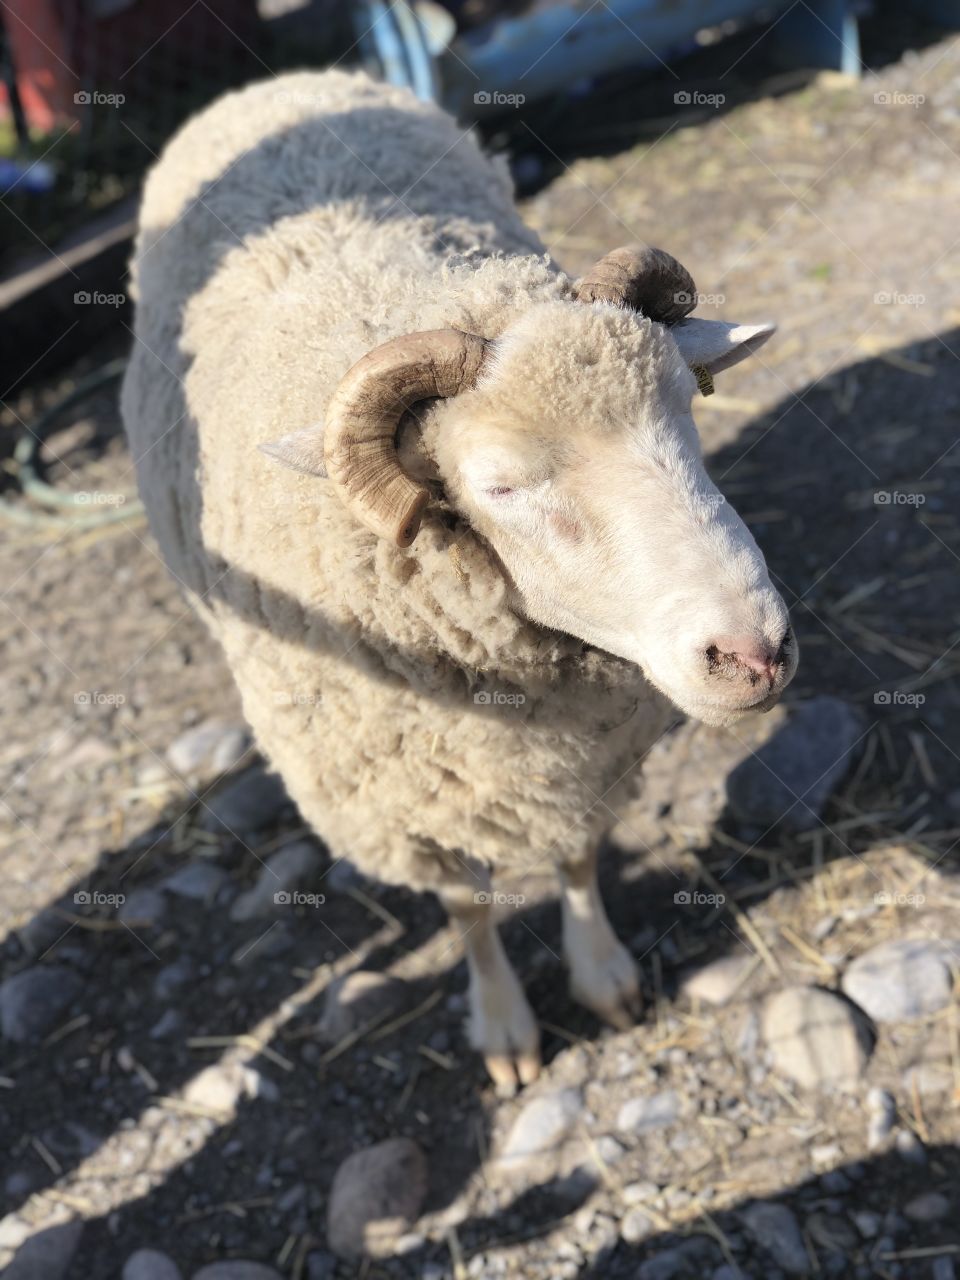 This cute sheep took a nap while standing in the sunset. Winding down after a busy day!